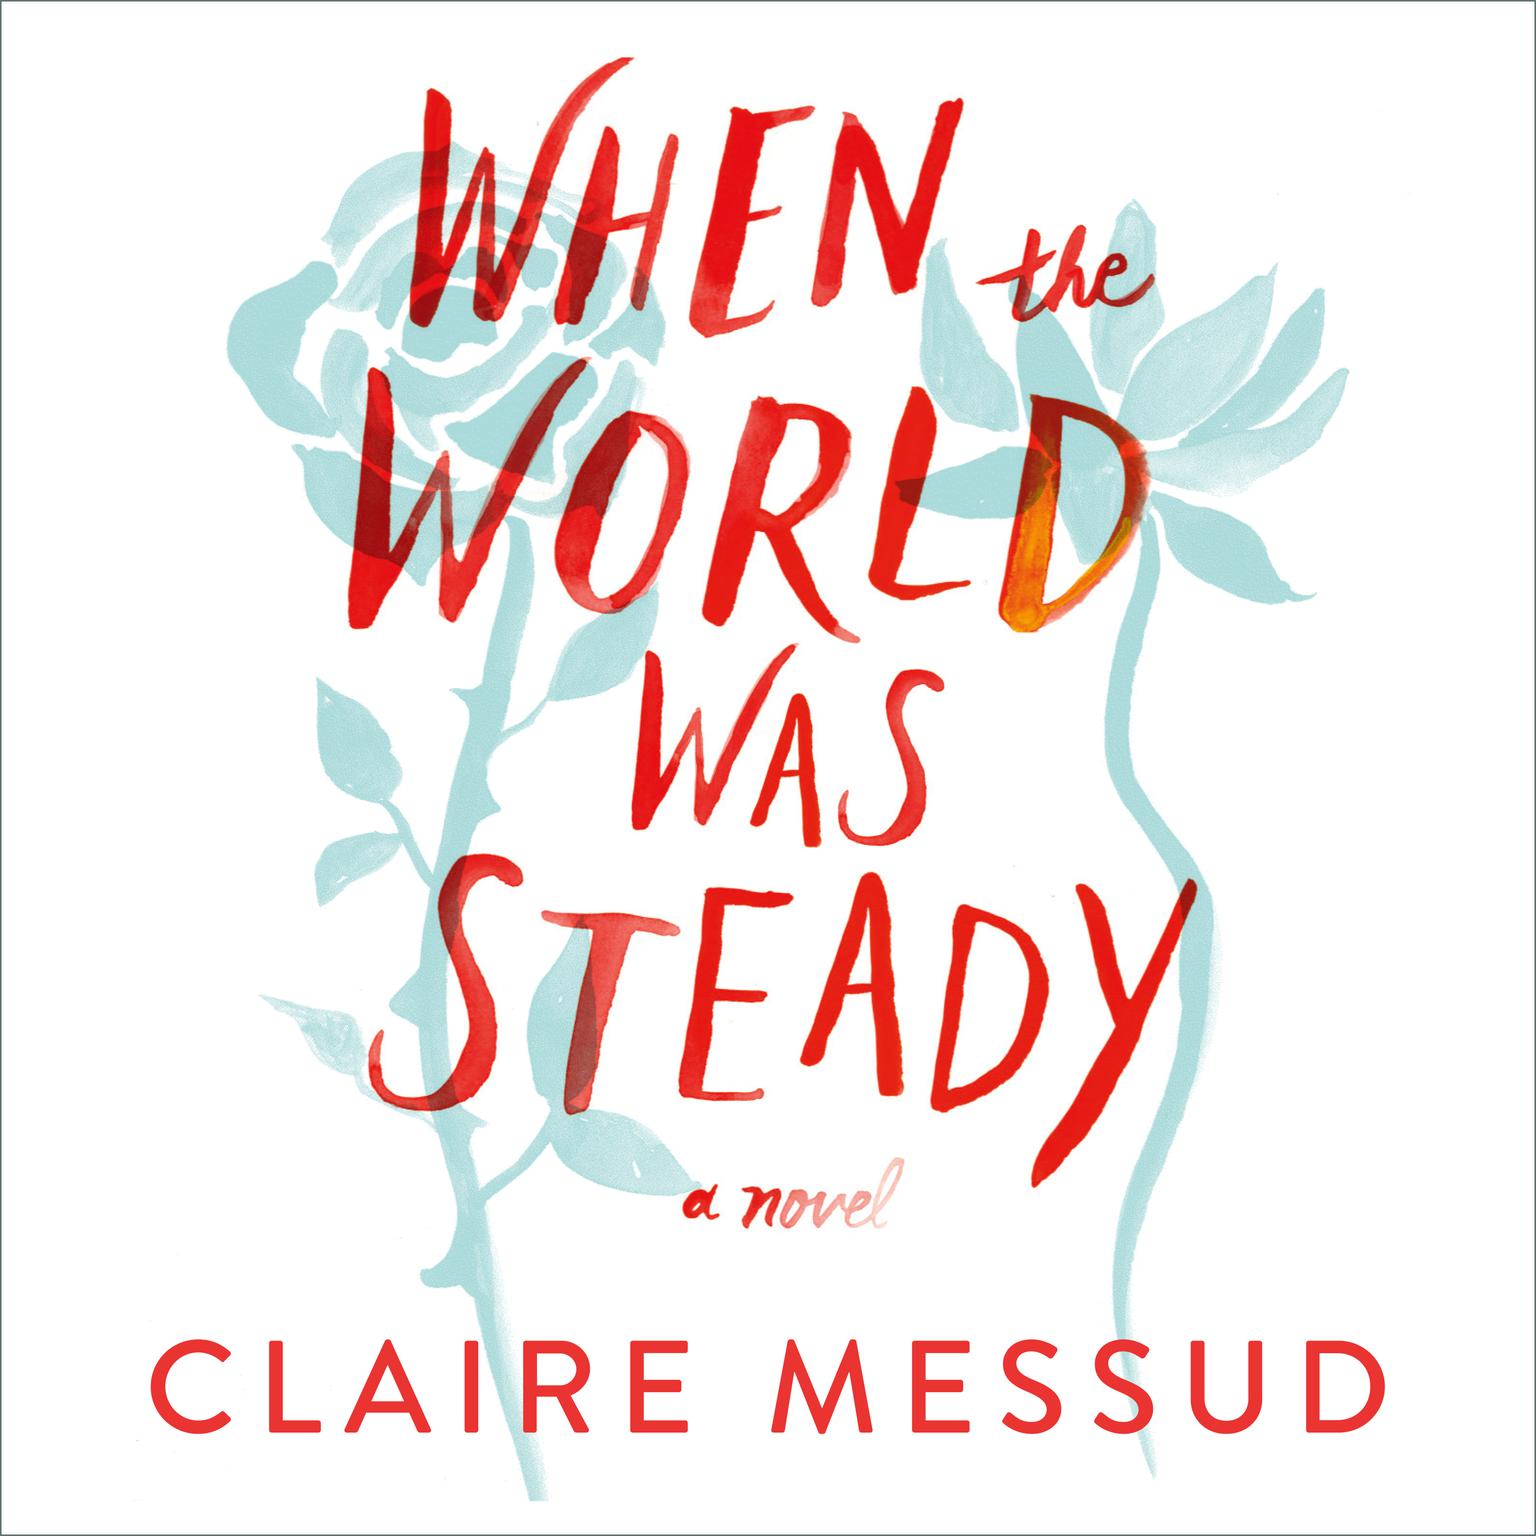 When the World Was Steady Audiobook, by Claire Messud